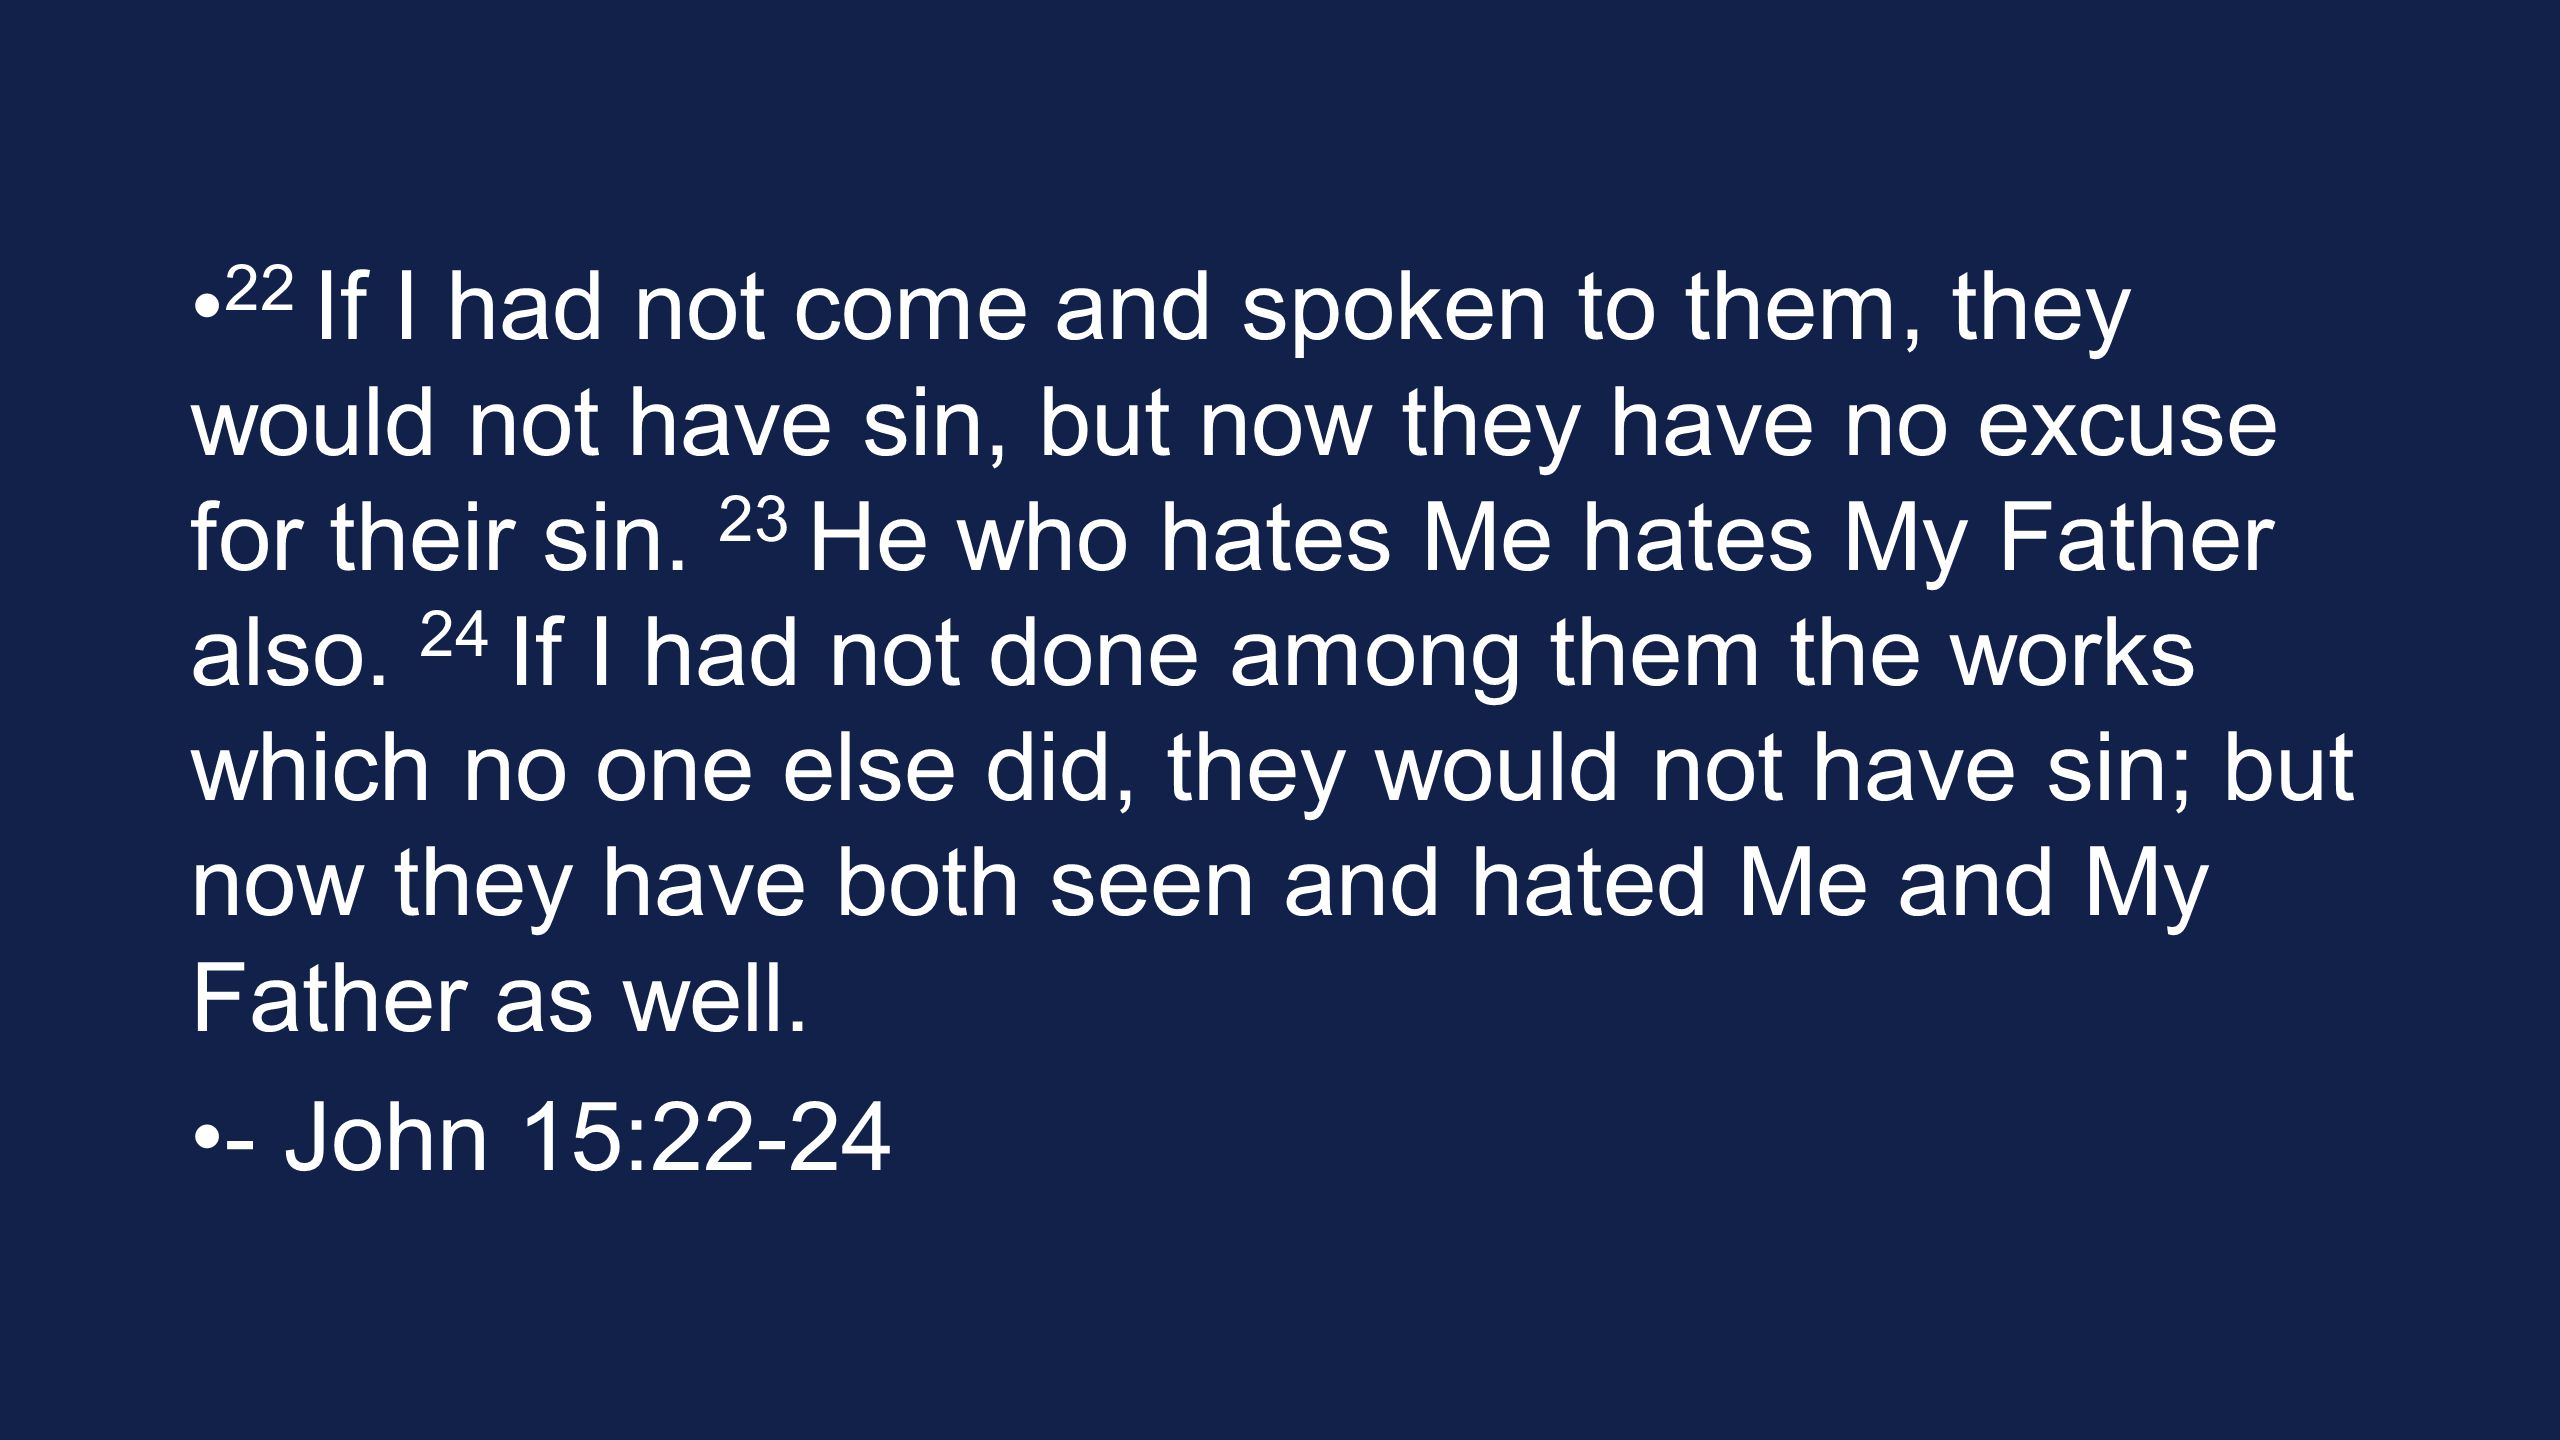 22 If I had not come and spoken to them, they would not have sin, but now they have no excuse for their sin.